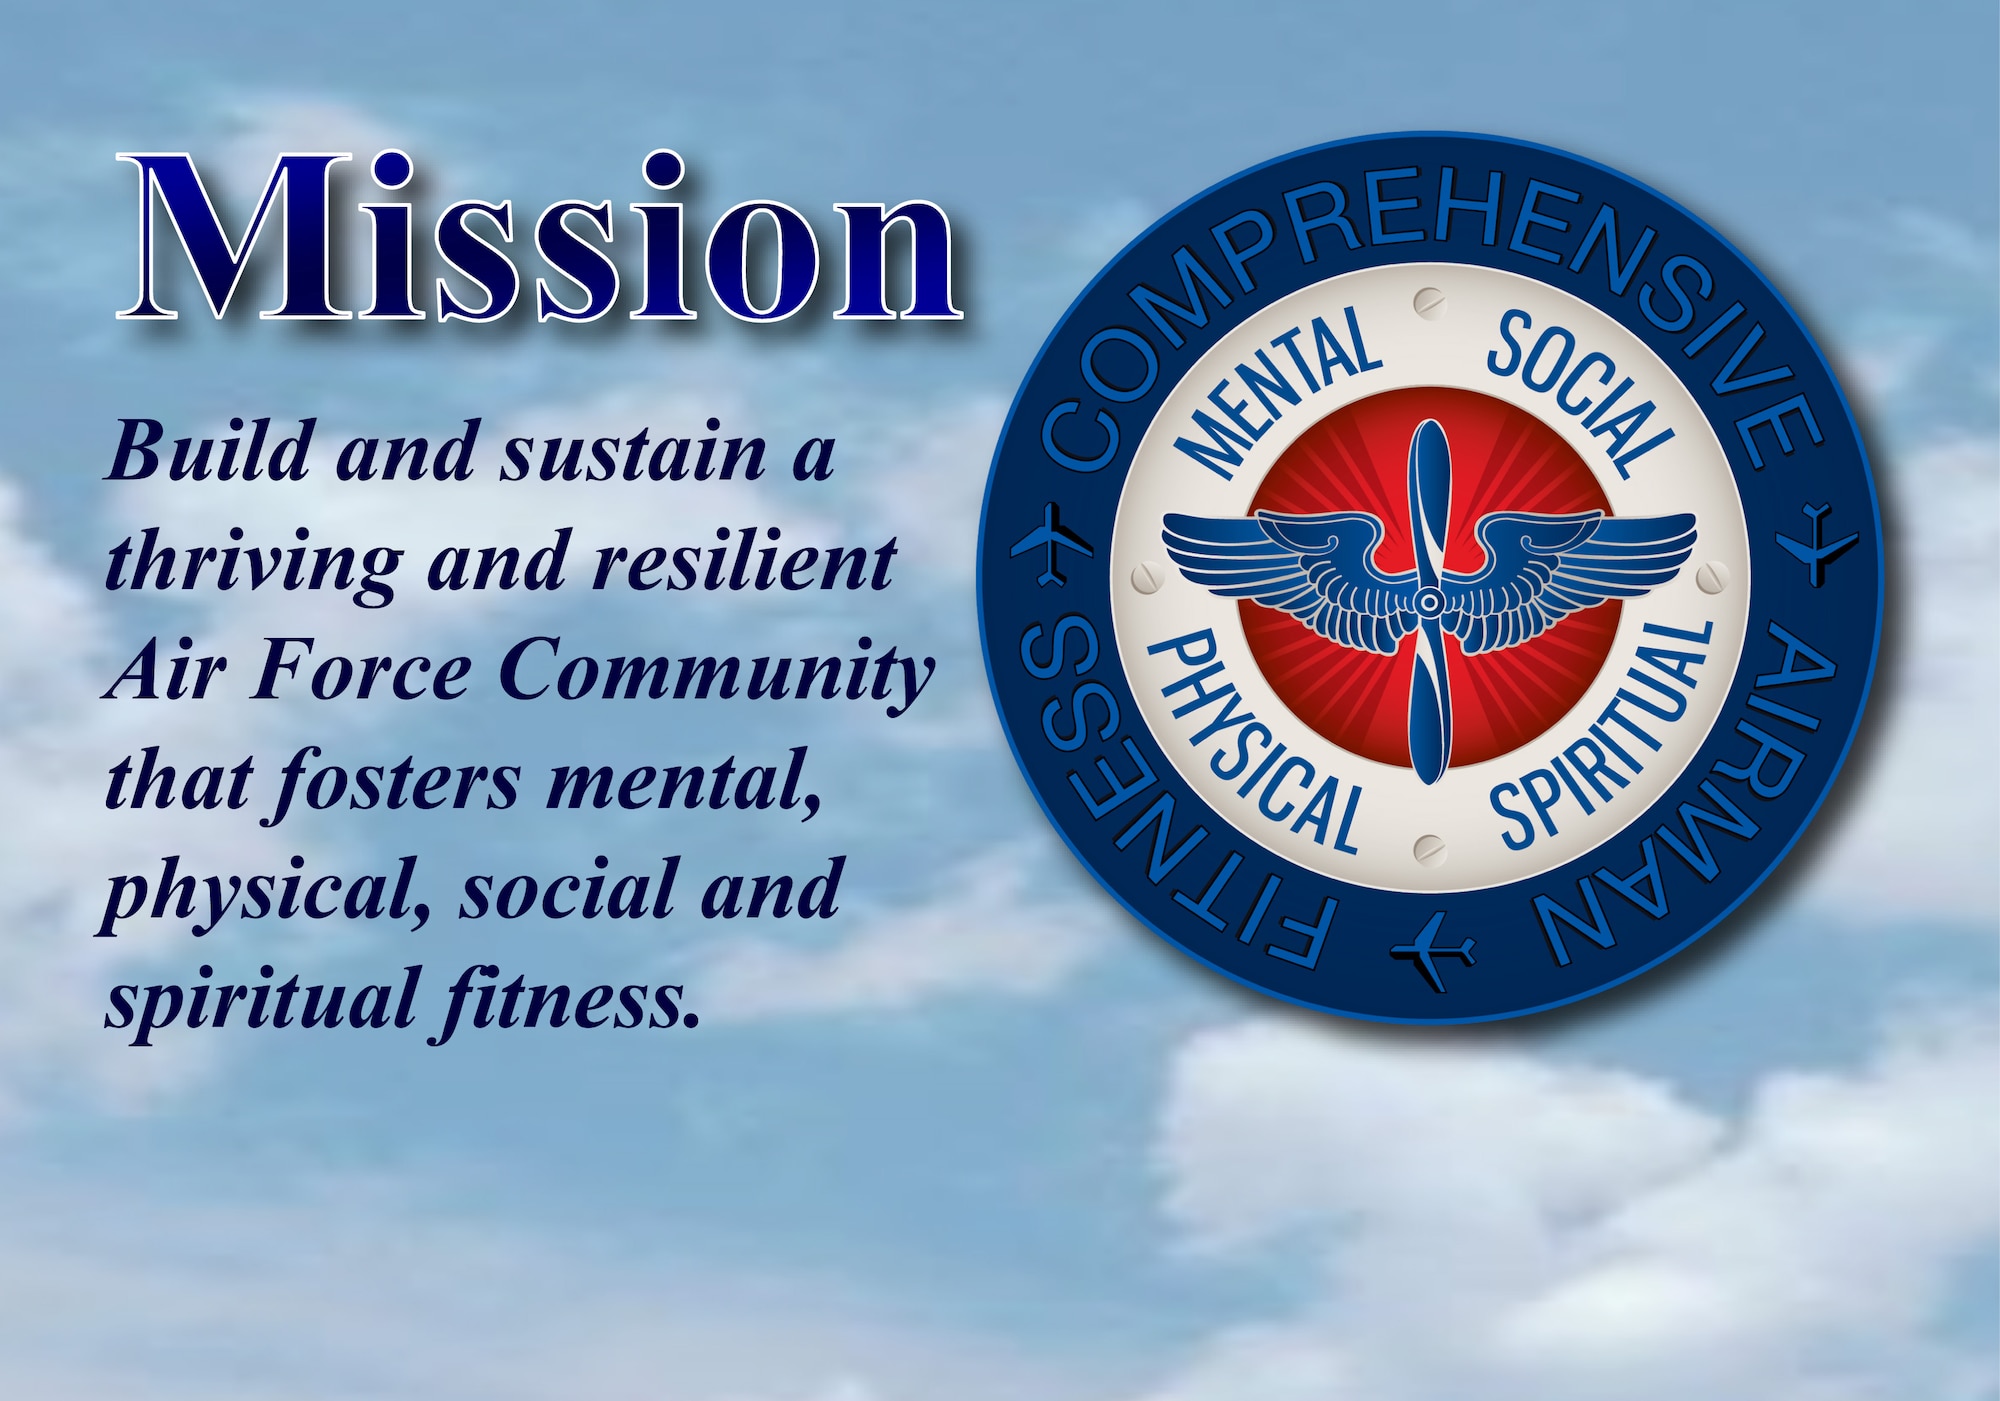 The mission of Comprehensive Airman Fitness Program is to build and sustain a thriving and resilient Air Force Community that fosters mental, physical, social and spiritual fitness, which are the areas of a person’s life and capture the totality of how they experience and relate to others and themselves. These areas are also referred to as the four pillars. CAF logo, sky back ground photo from smart phone and drop shadow effect on text were added using Adobe In Design CS4. (U.S. Air Force graphic/Staff Sgt. Luis Loza Gutierrez)